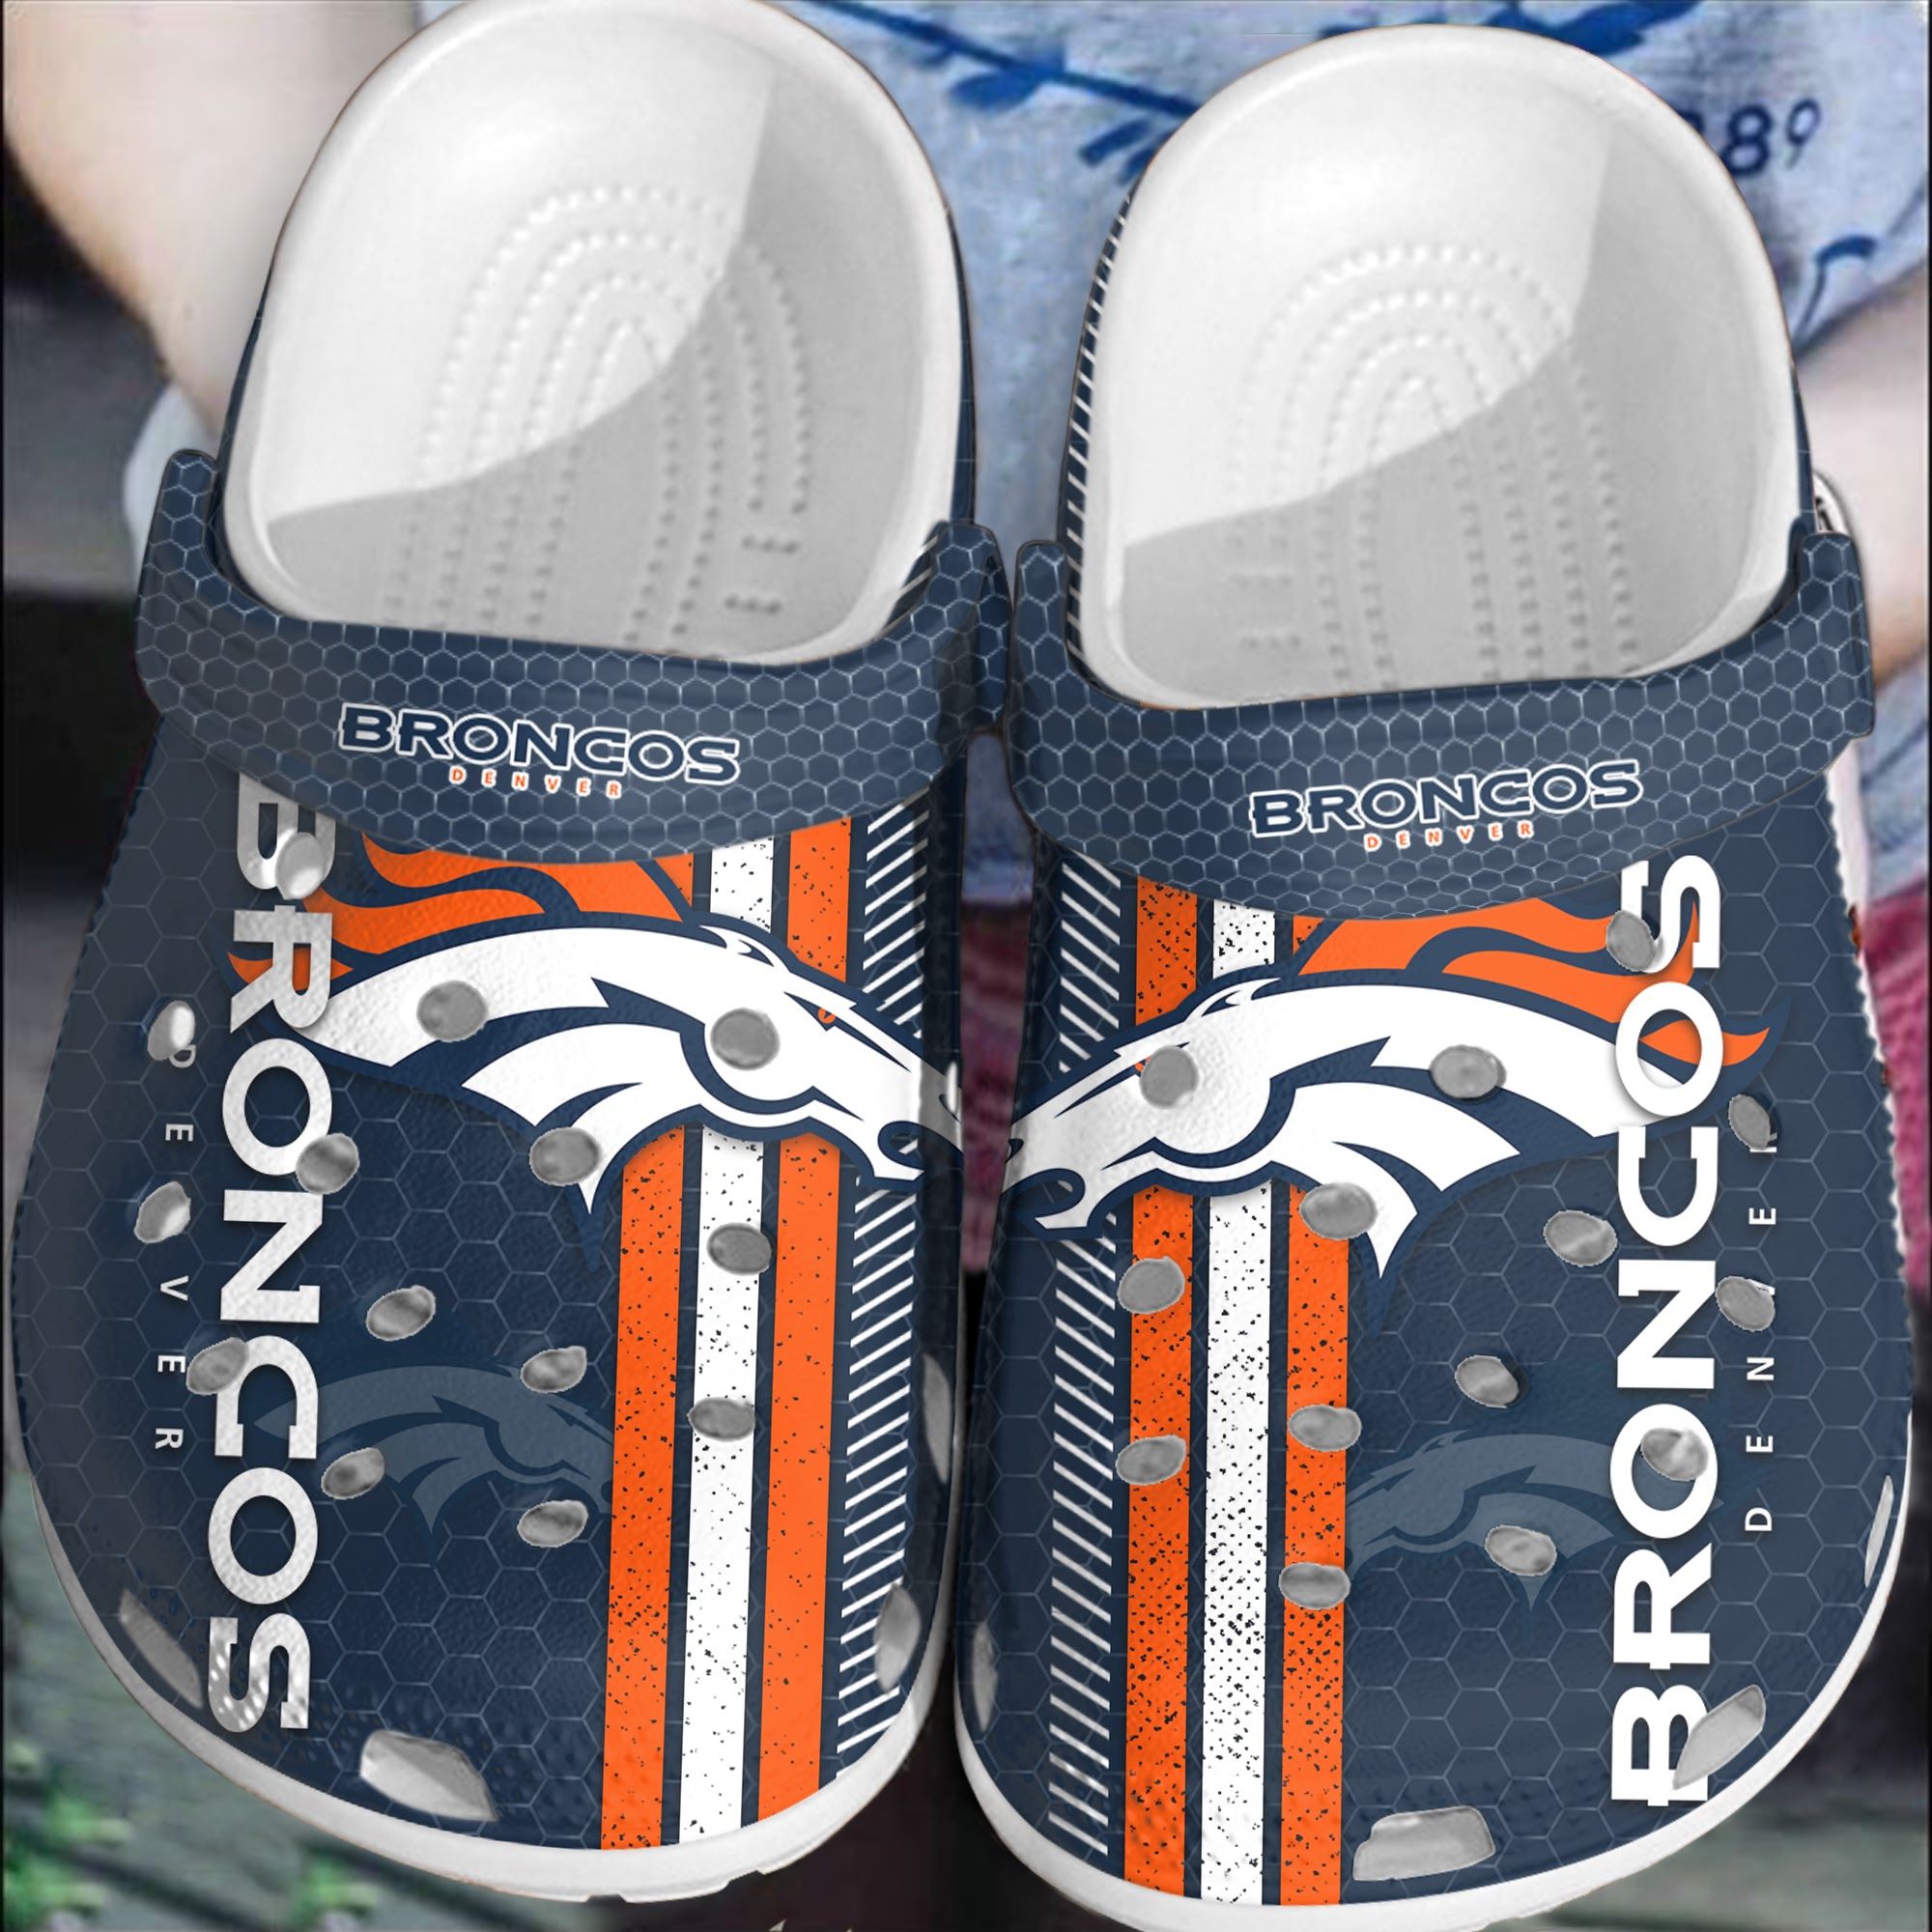 If you'd like to purchase a pair of Crocband Clogs, be sure to check out the official website. 50